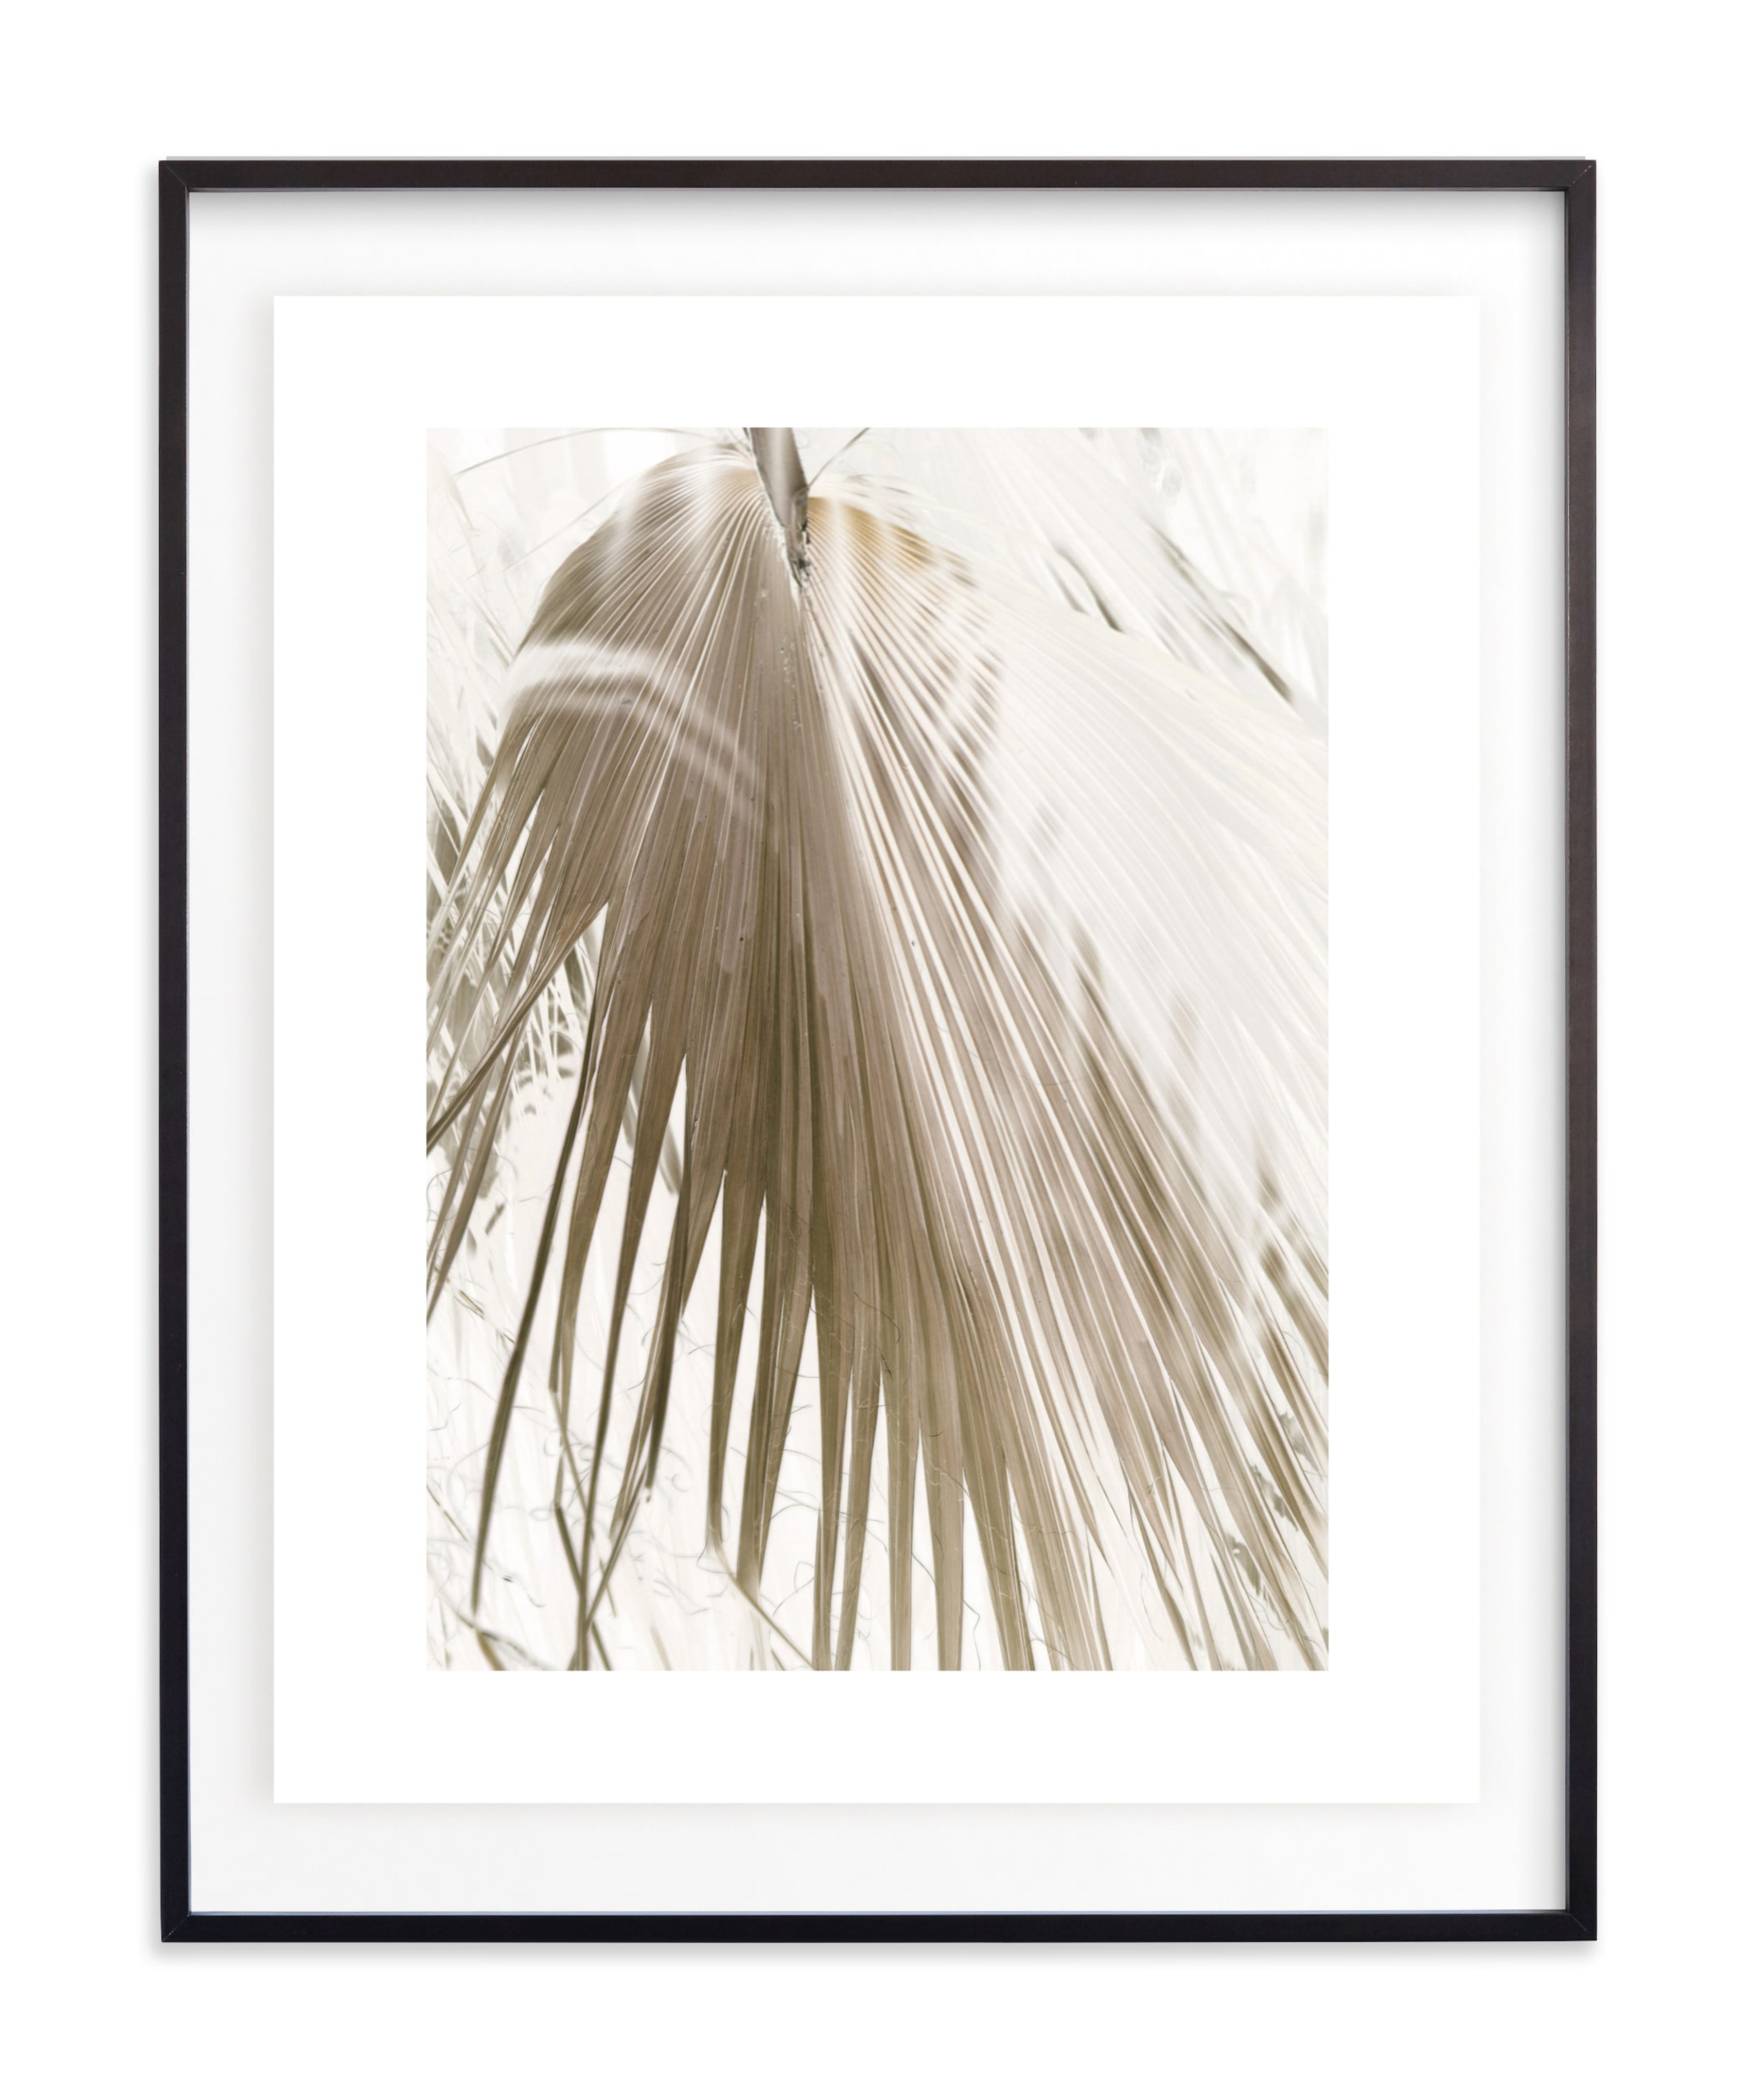 Vanilla Palm - Day - Float Mounted Matte Black Frame - 24x30 - Minted